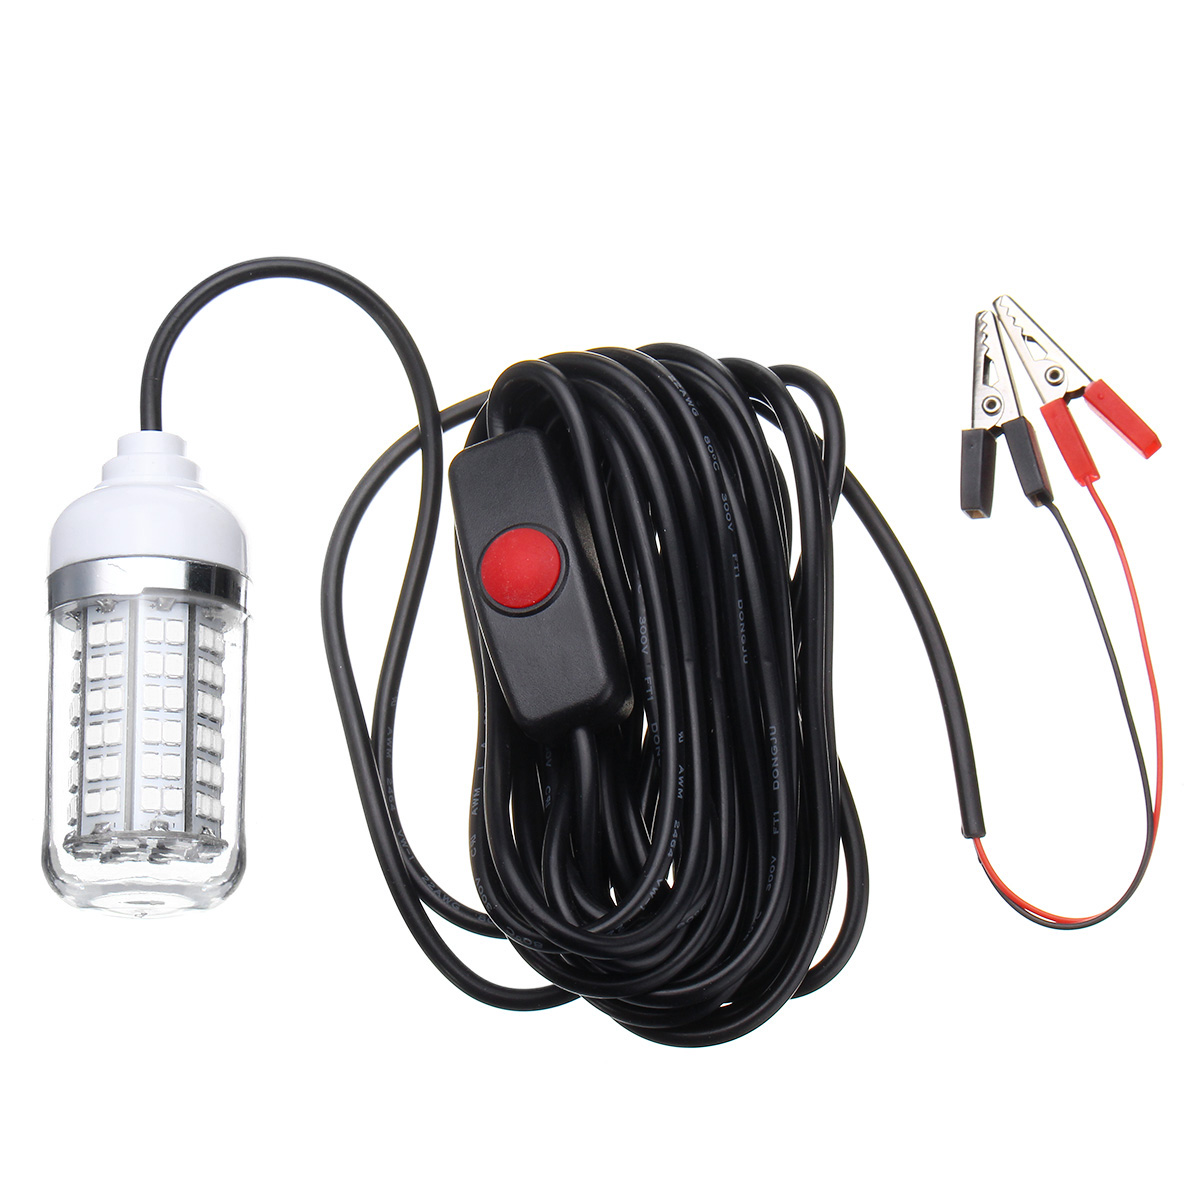 DC12V-7W-SMD2835-108-Underwater-LED-Fishing-Night-Boat-Attracts-Fish-Squid-Light-Bulb-with-Switch-1276984-2